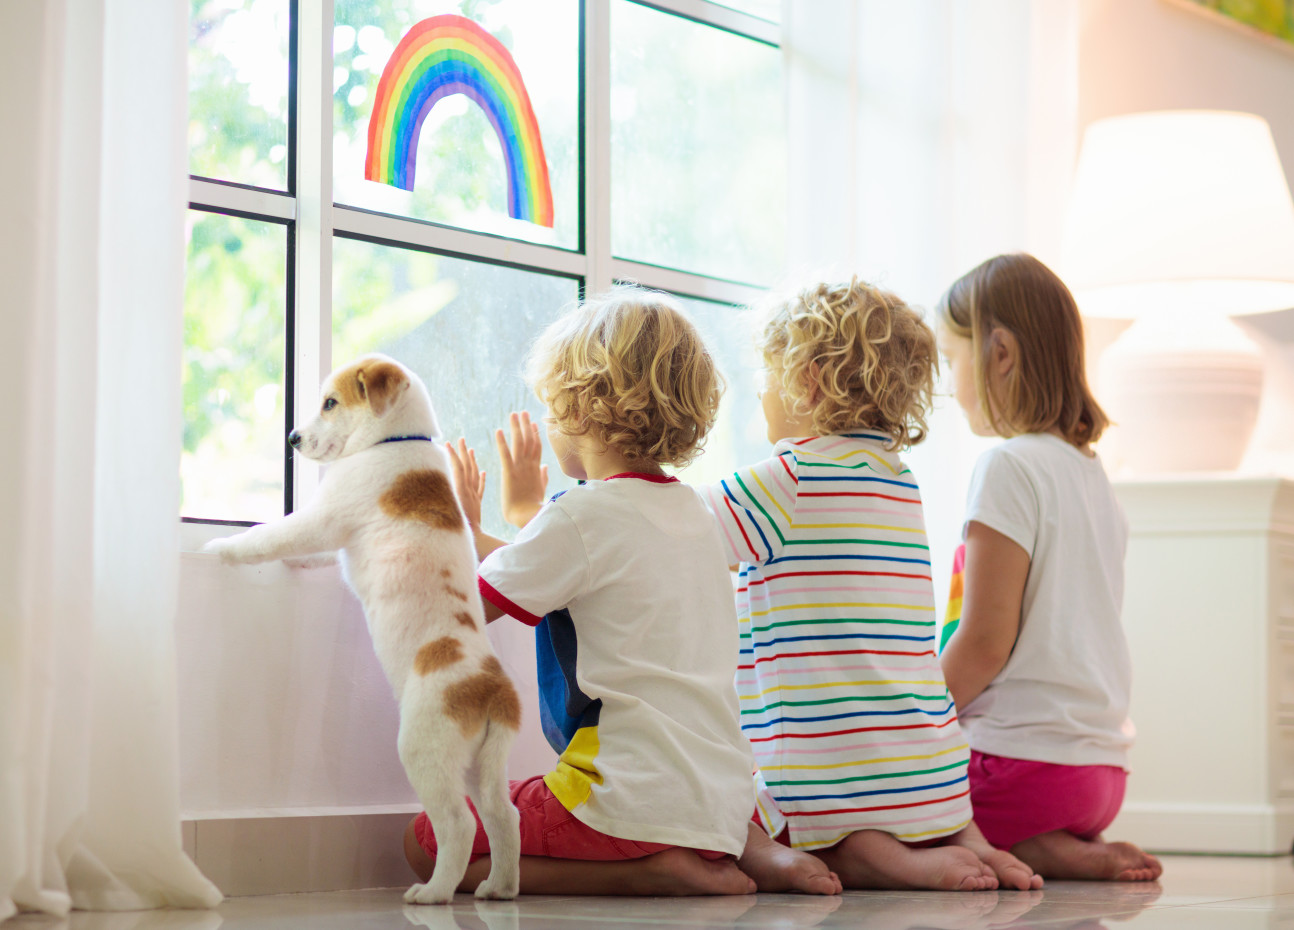 Children and a dog looking out of a bedroom window